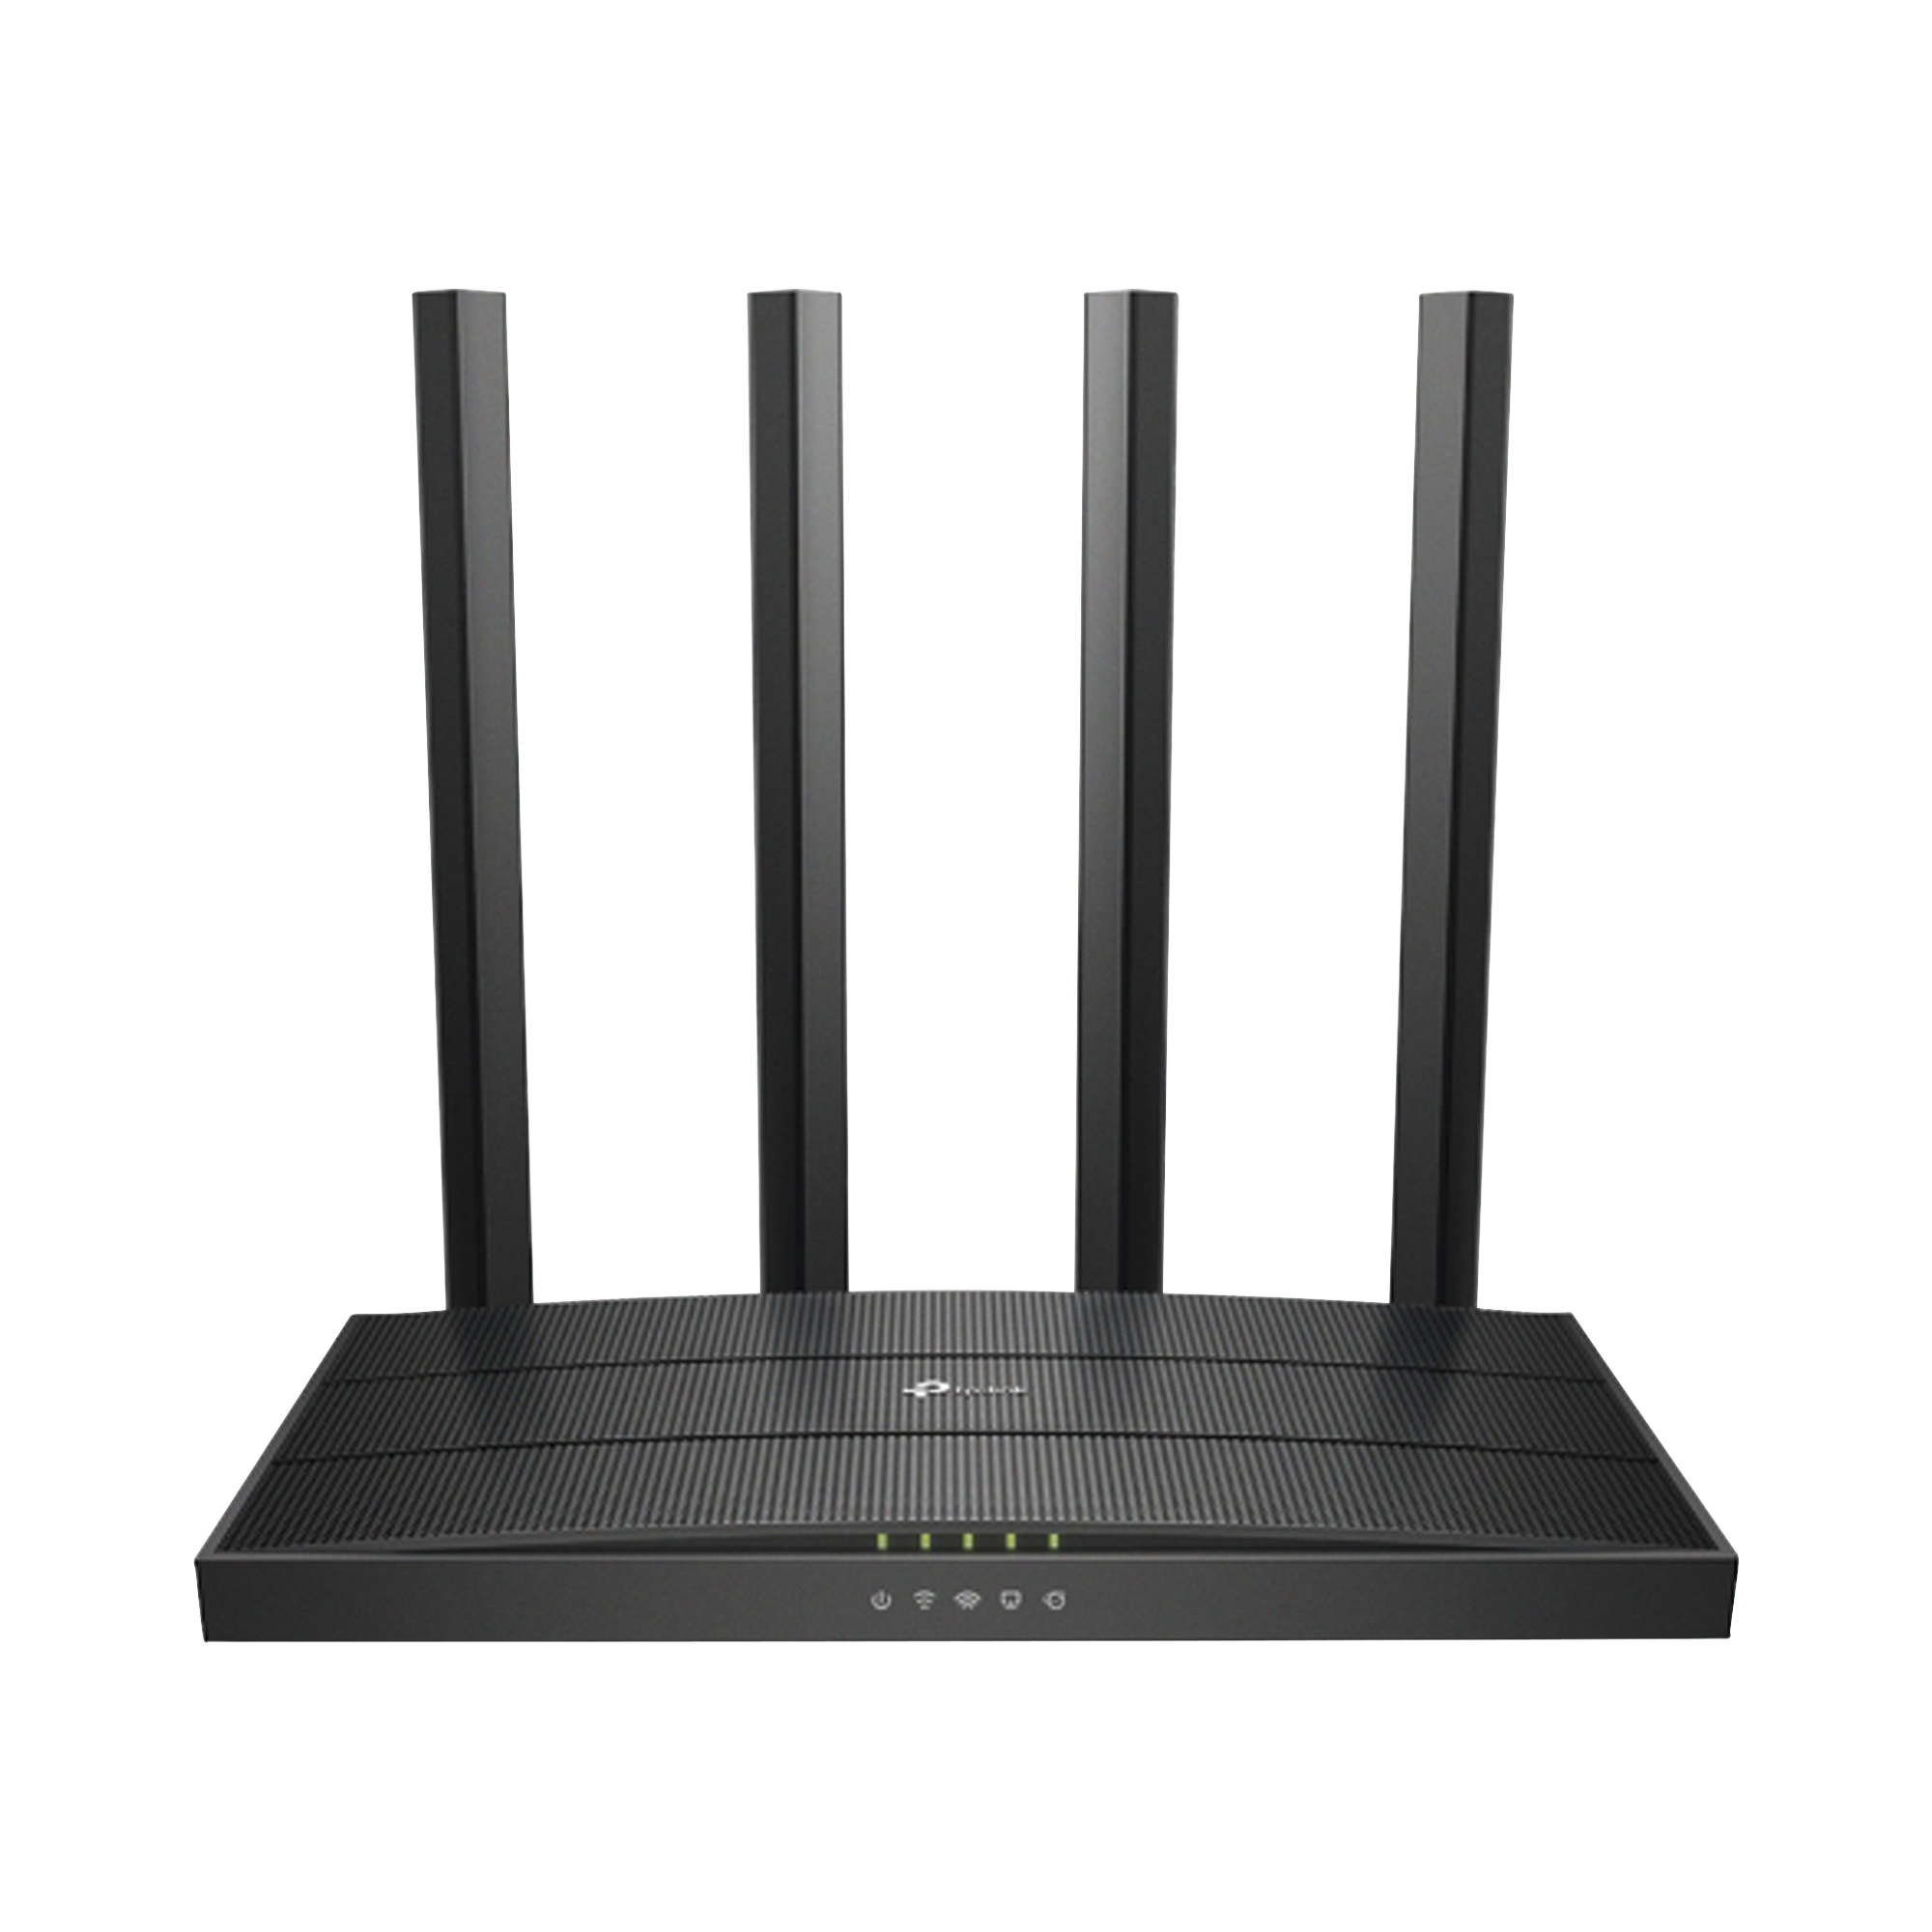 Router inalámbrico AC Wave 2 1900 doble banda 1 puerto WAN 10/100/1000 Mbps y 4 puertos LAN 10/100/1000 Mbps, MIMO 3X3, Beamforming